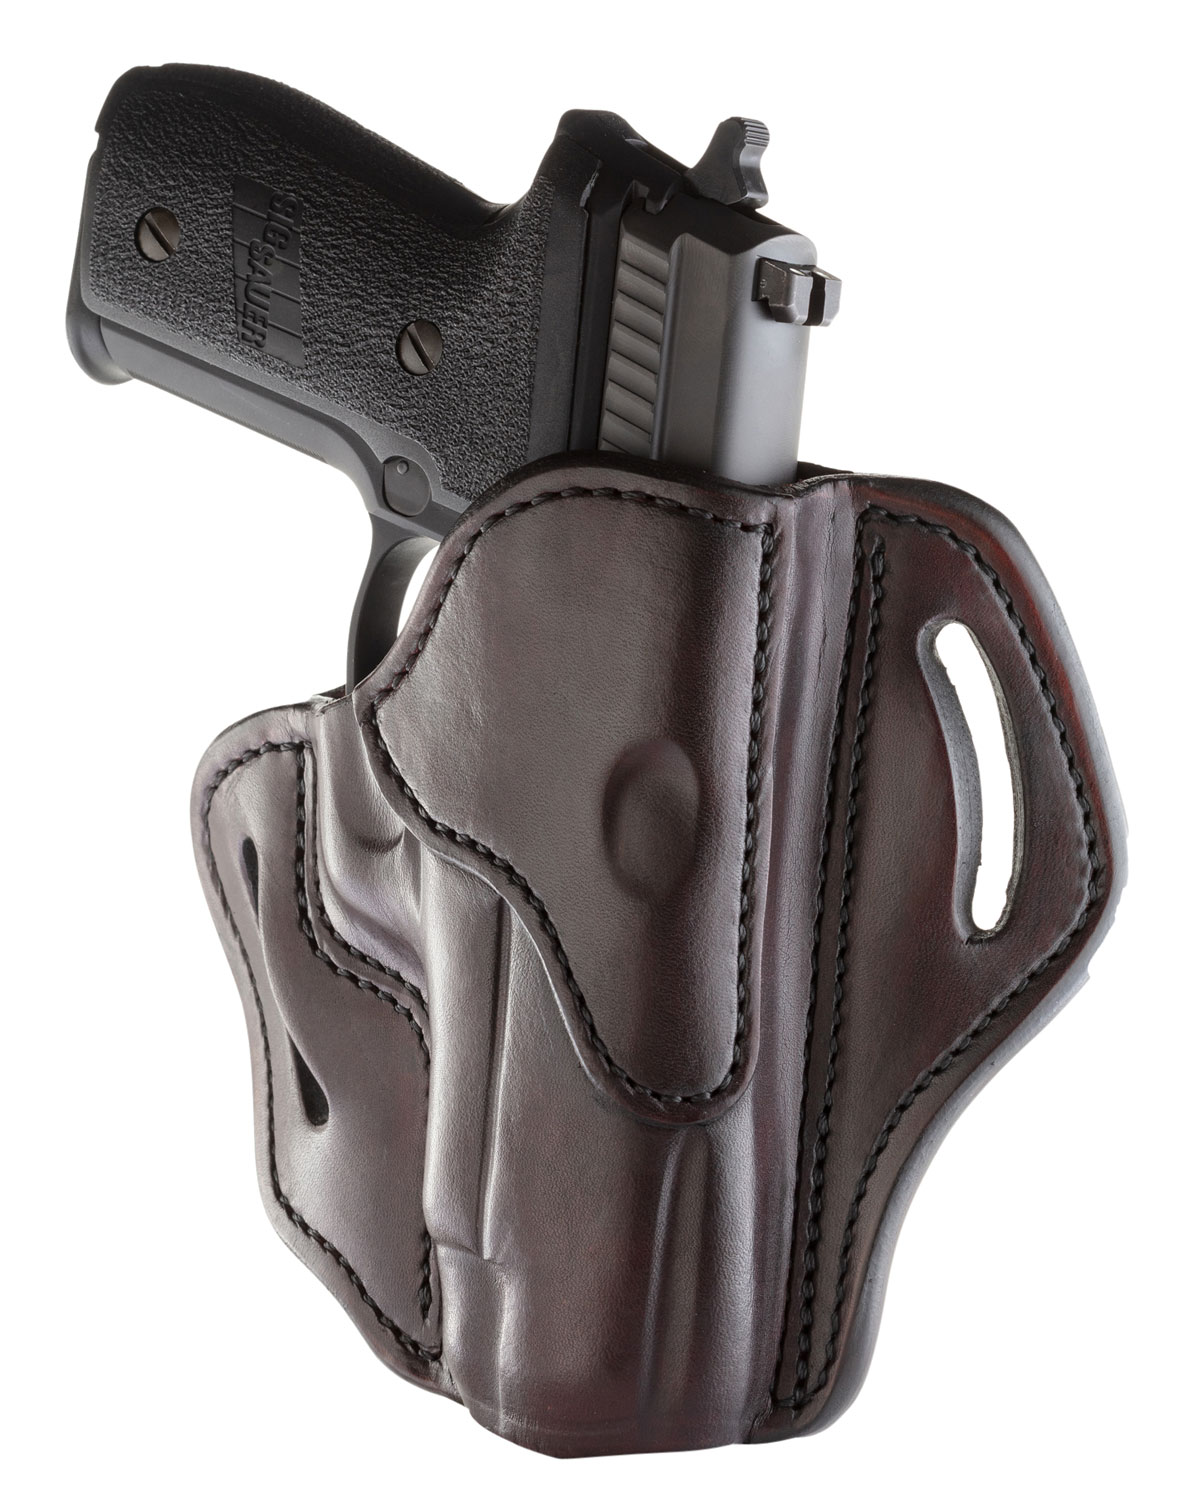 1791 Gunleather BH23SBRR BH2.3  Signature Brown Leather OWB Fits Glock 17; HK VP9; Sig P226 Right Hand